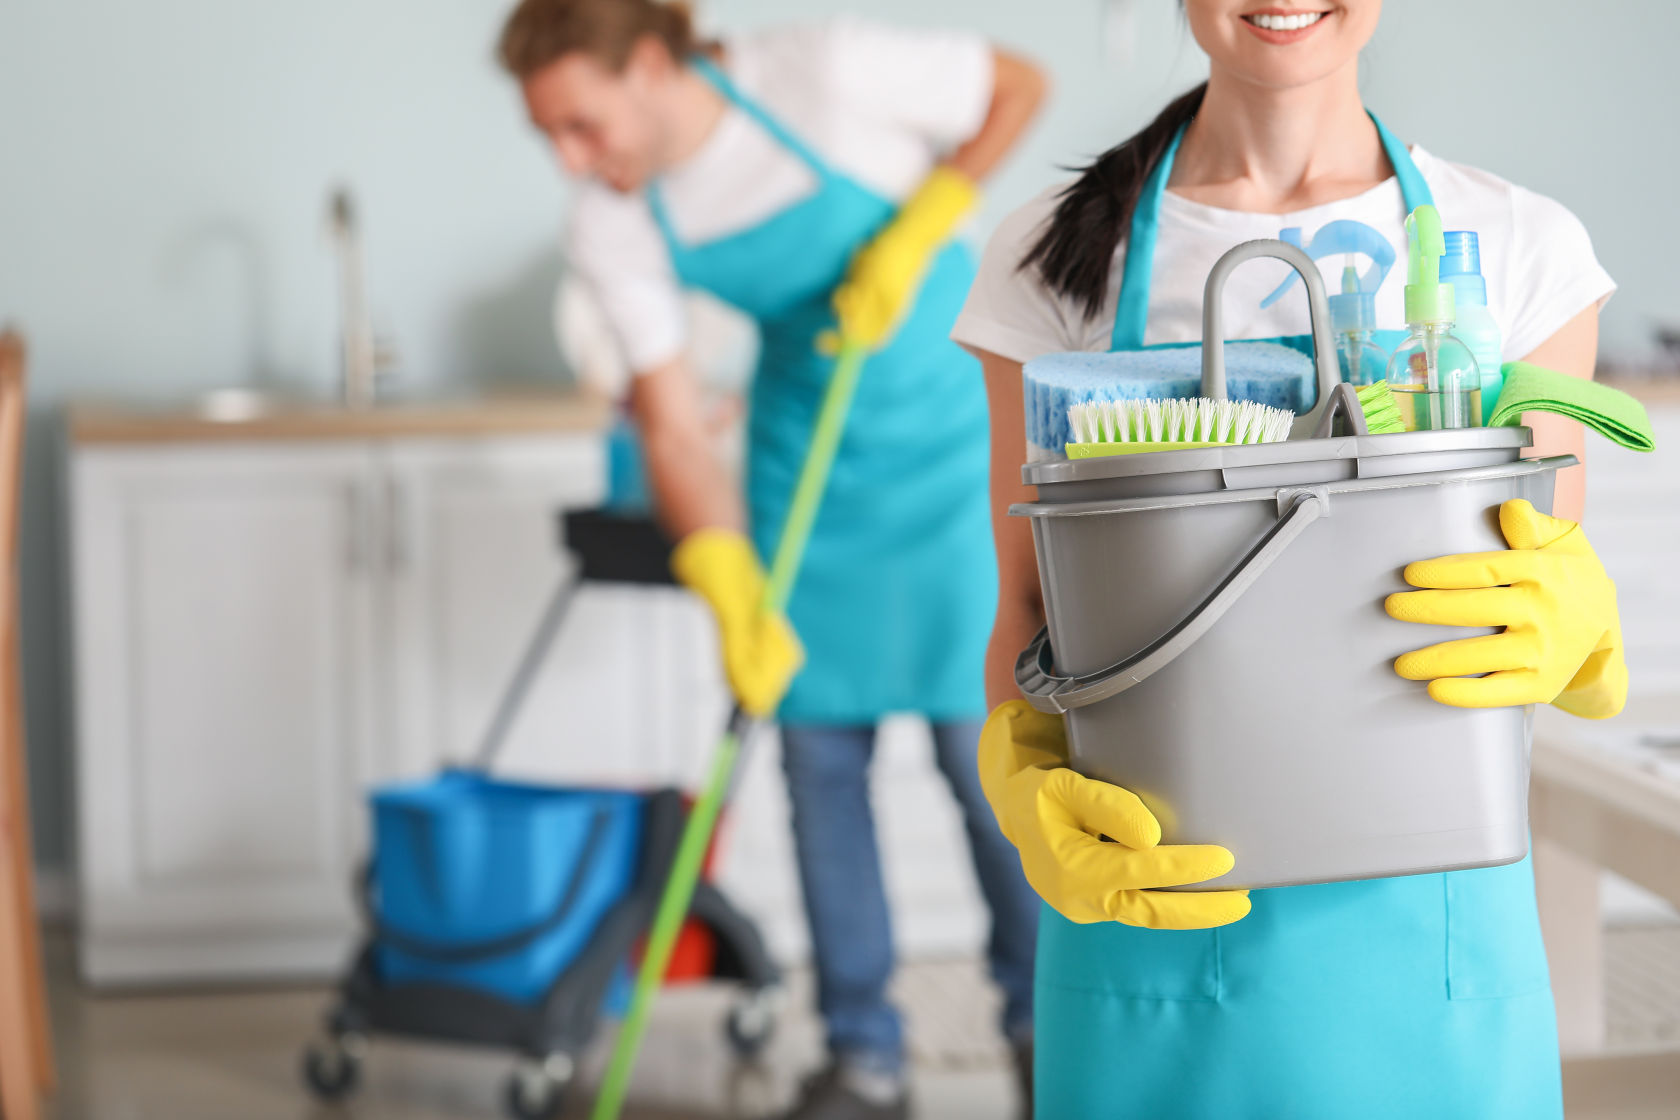 Commercial Cleaning Supplies List: 13 Must-Have Products